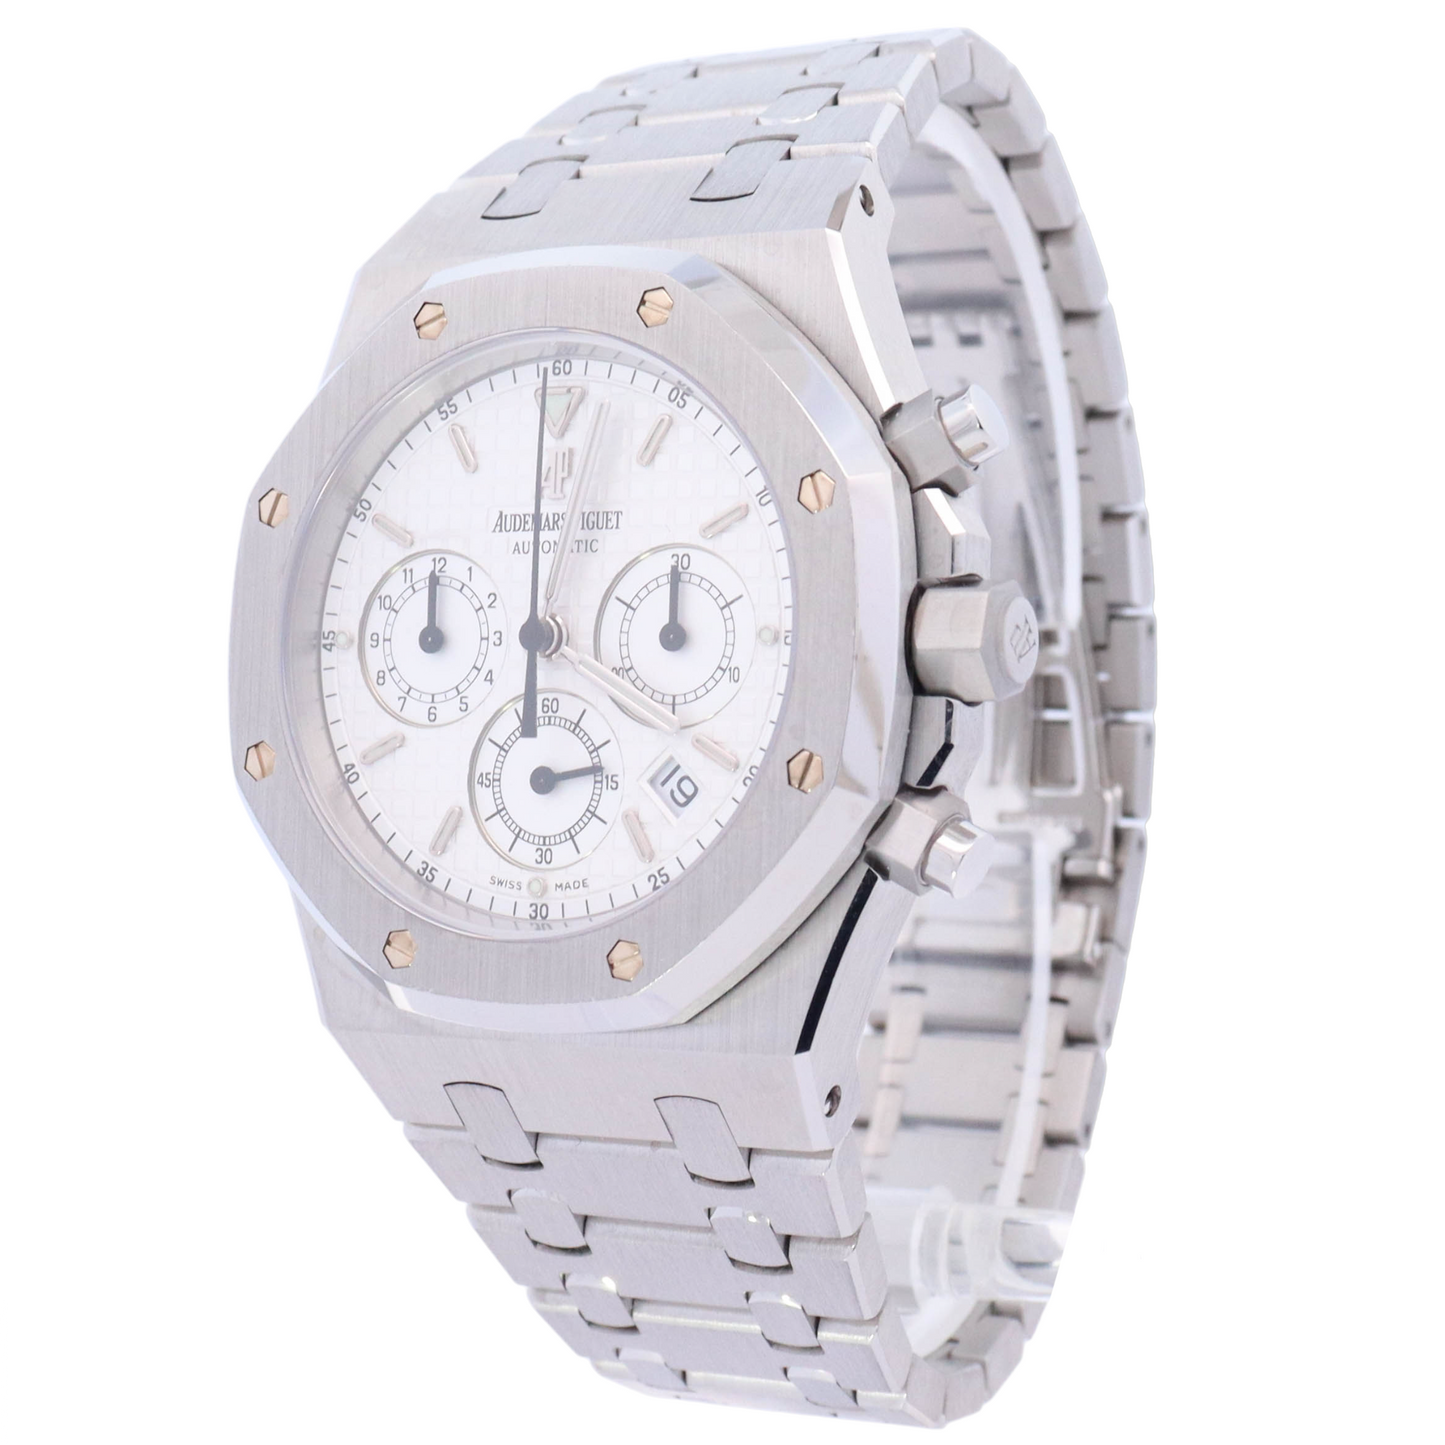 Audemars Piguet Royal Oak 39mm Stainless Steel White Chronograph Dial Watch Reference# 25860ST.OO.1110ST.05 - Happy Jewelers Fine Jewelry Lifetime Warranty